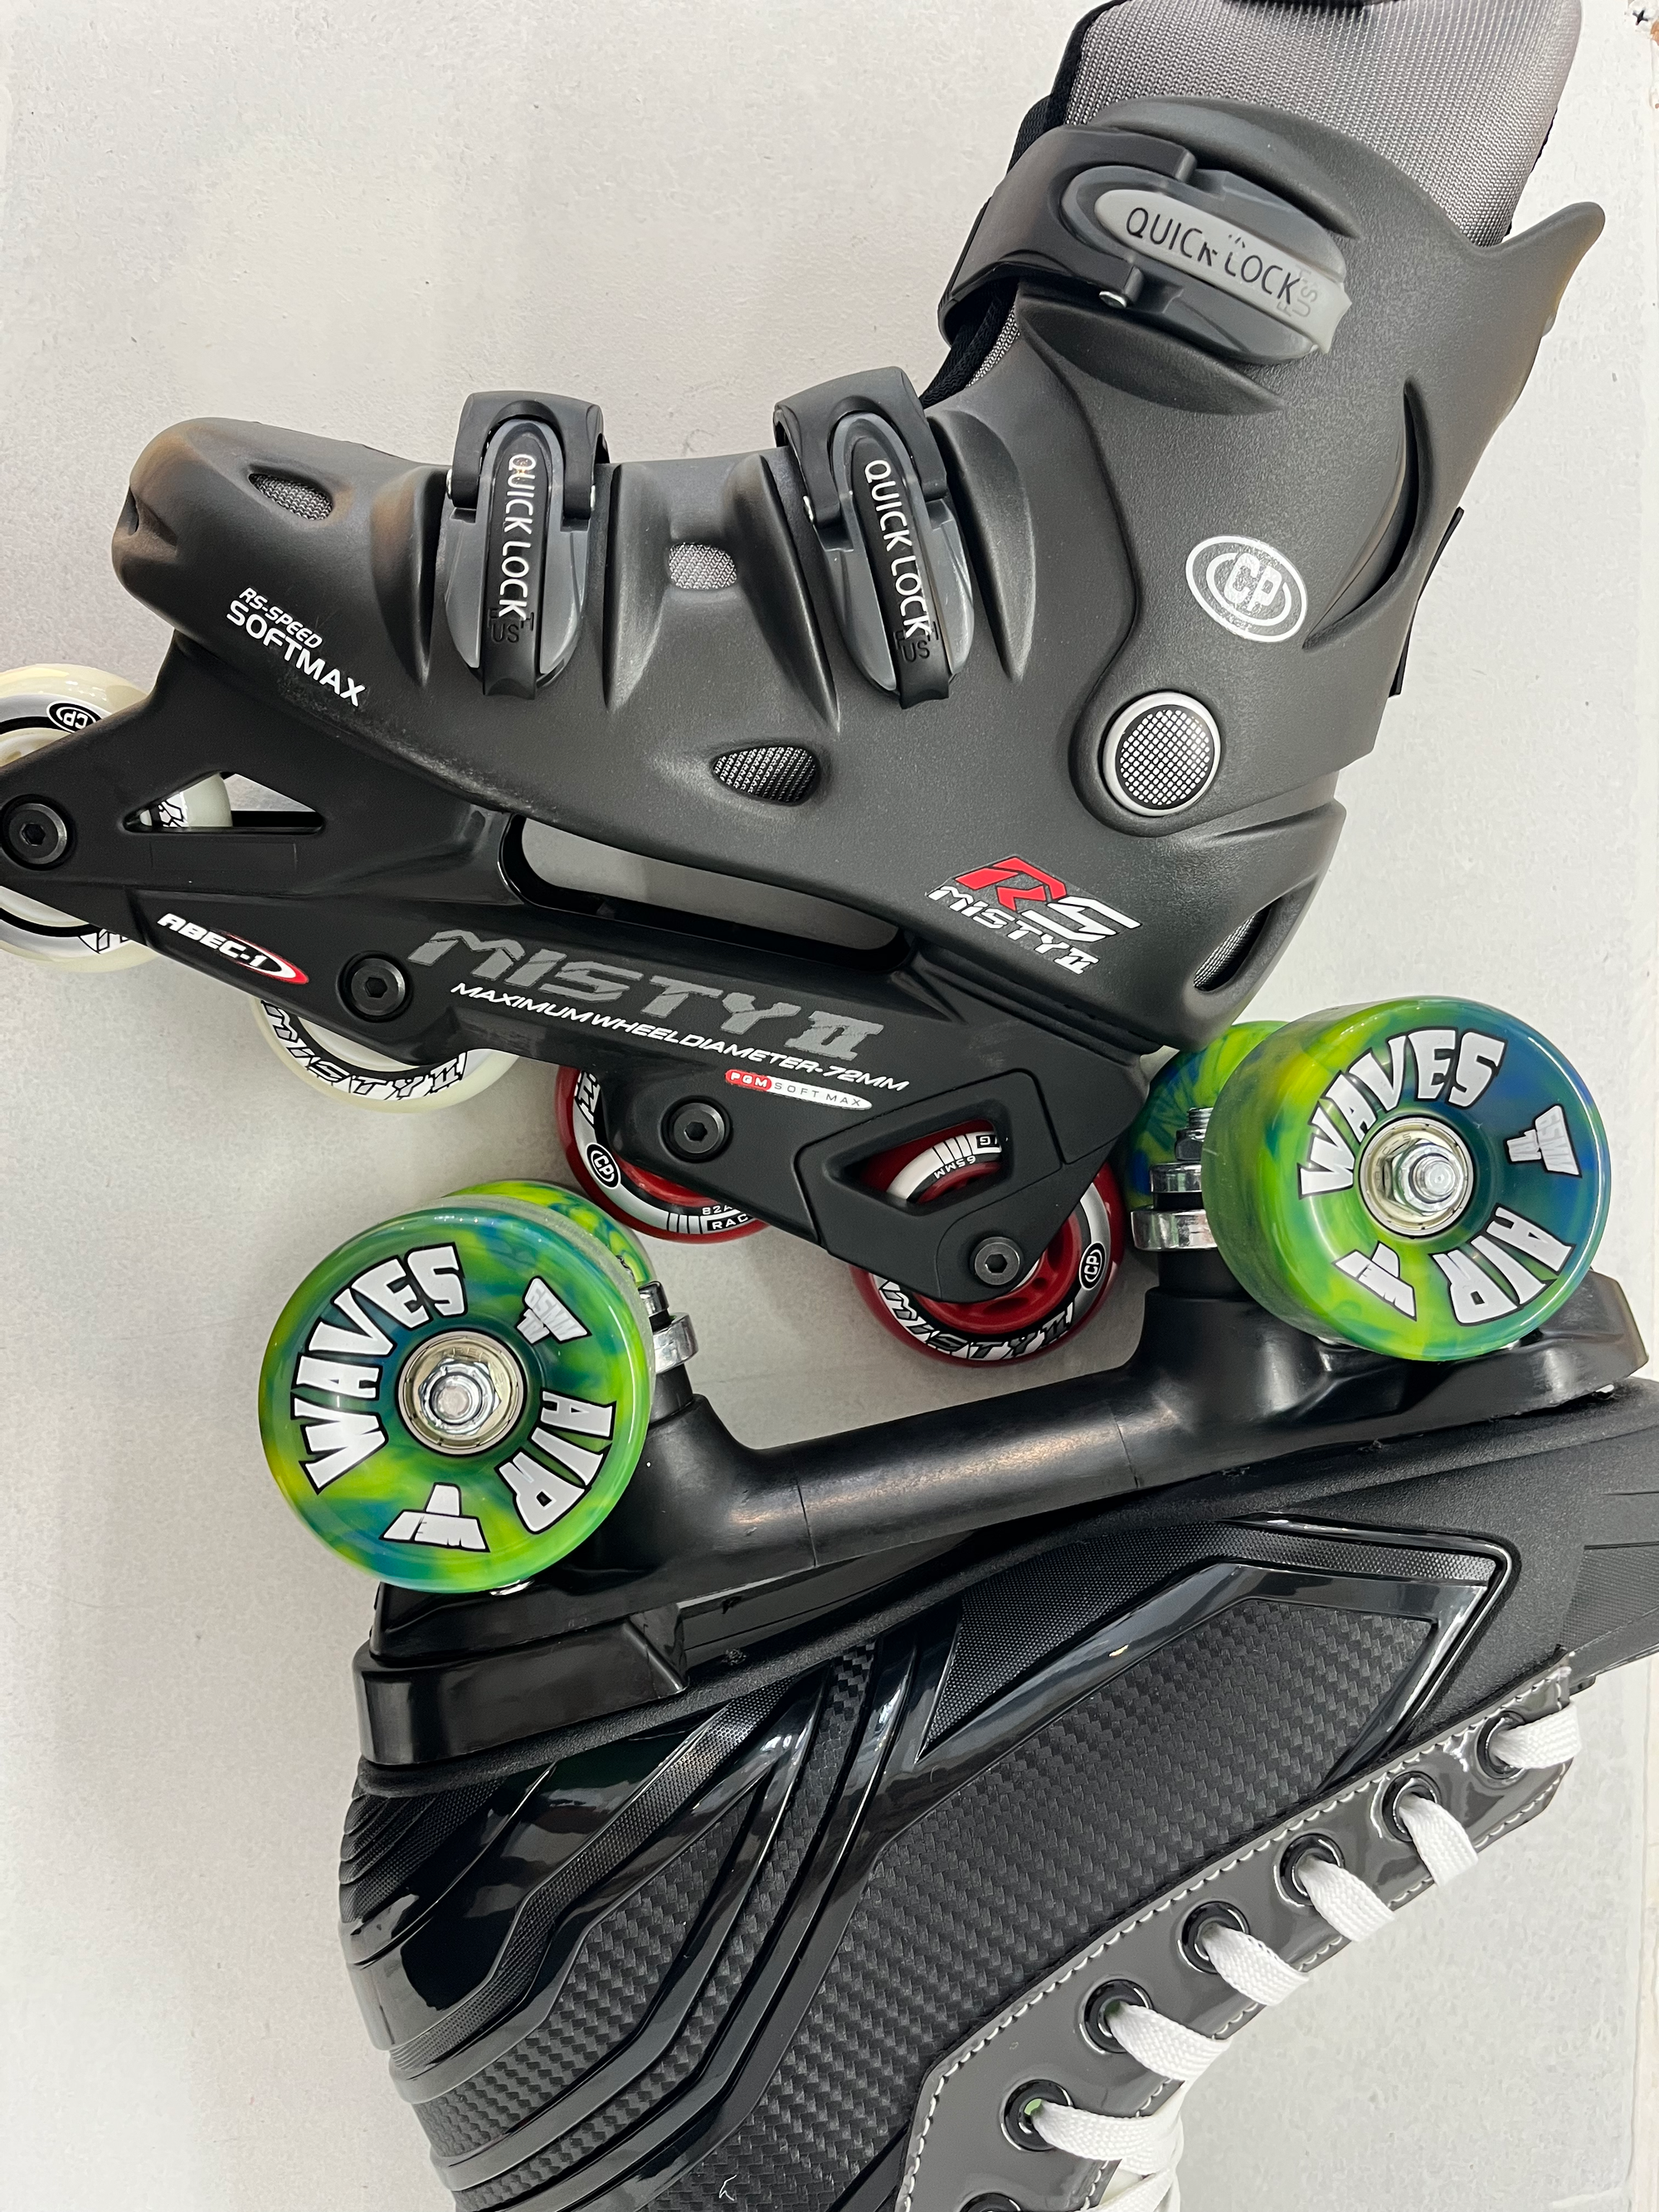 Quad or Inline Roller Skates: Which one is right for me?